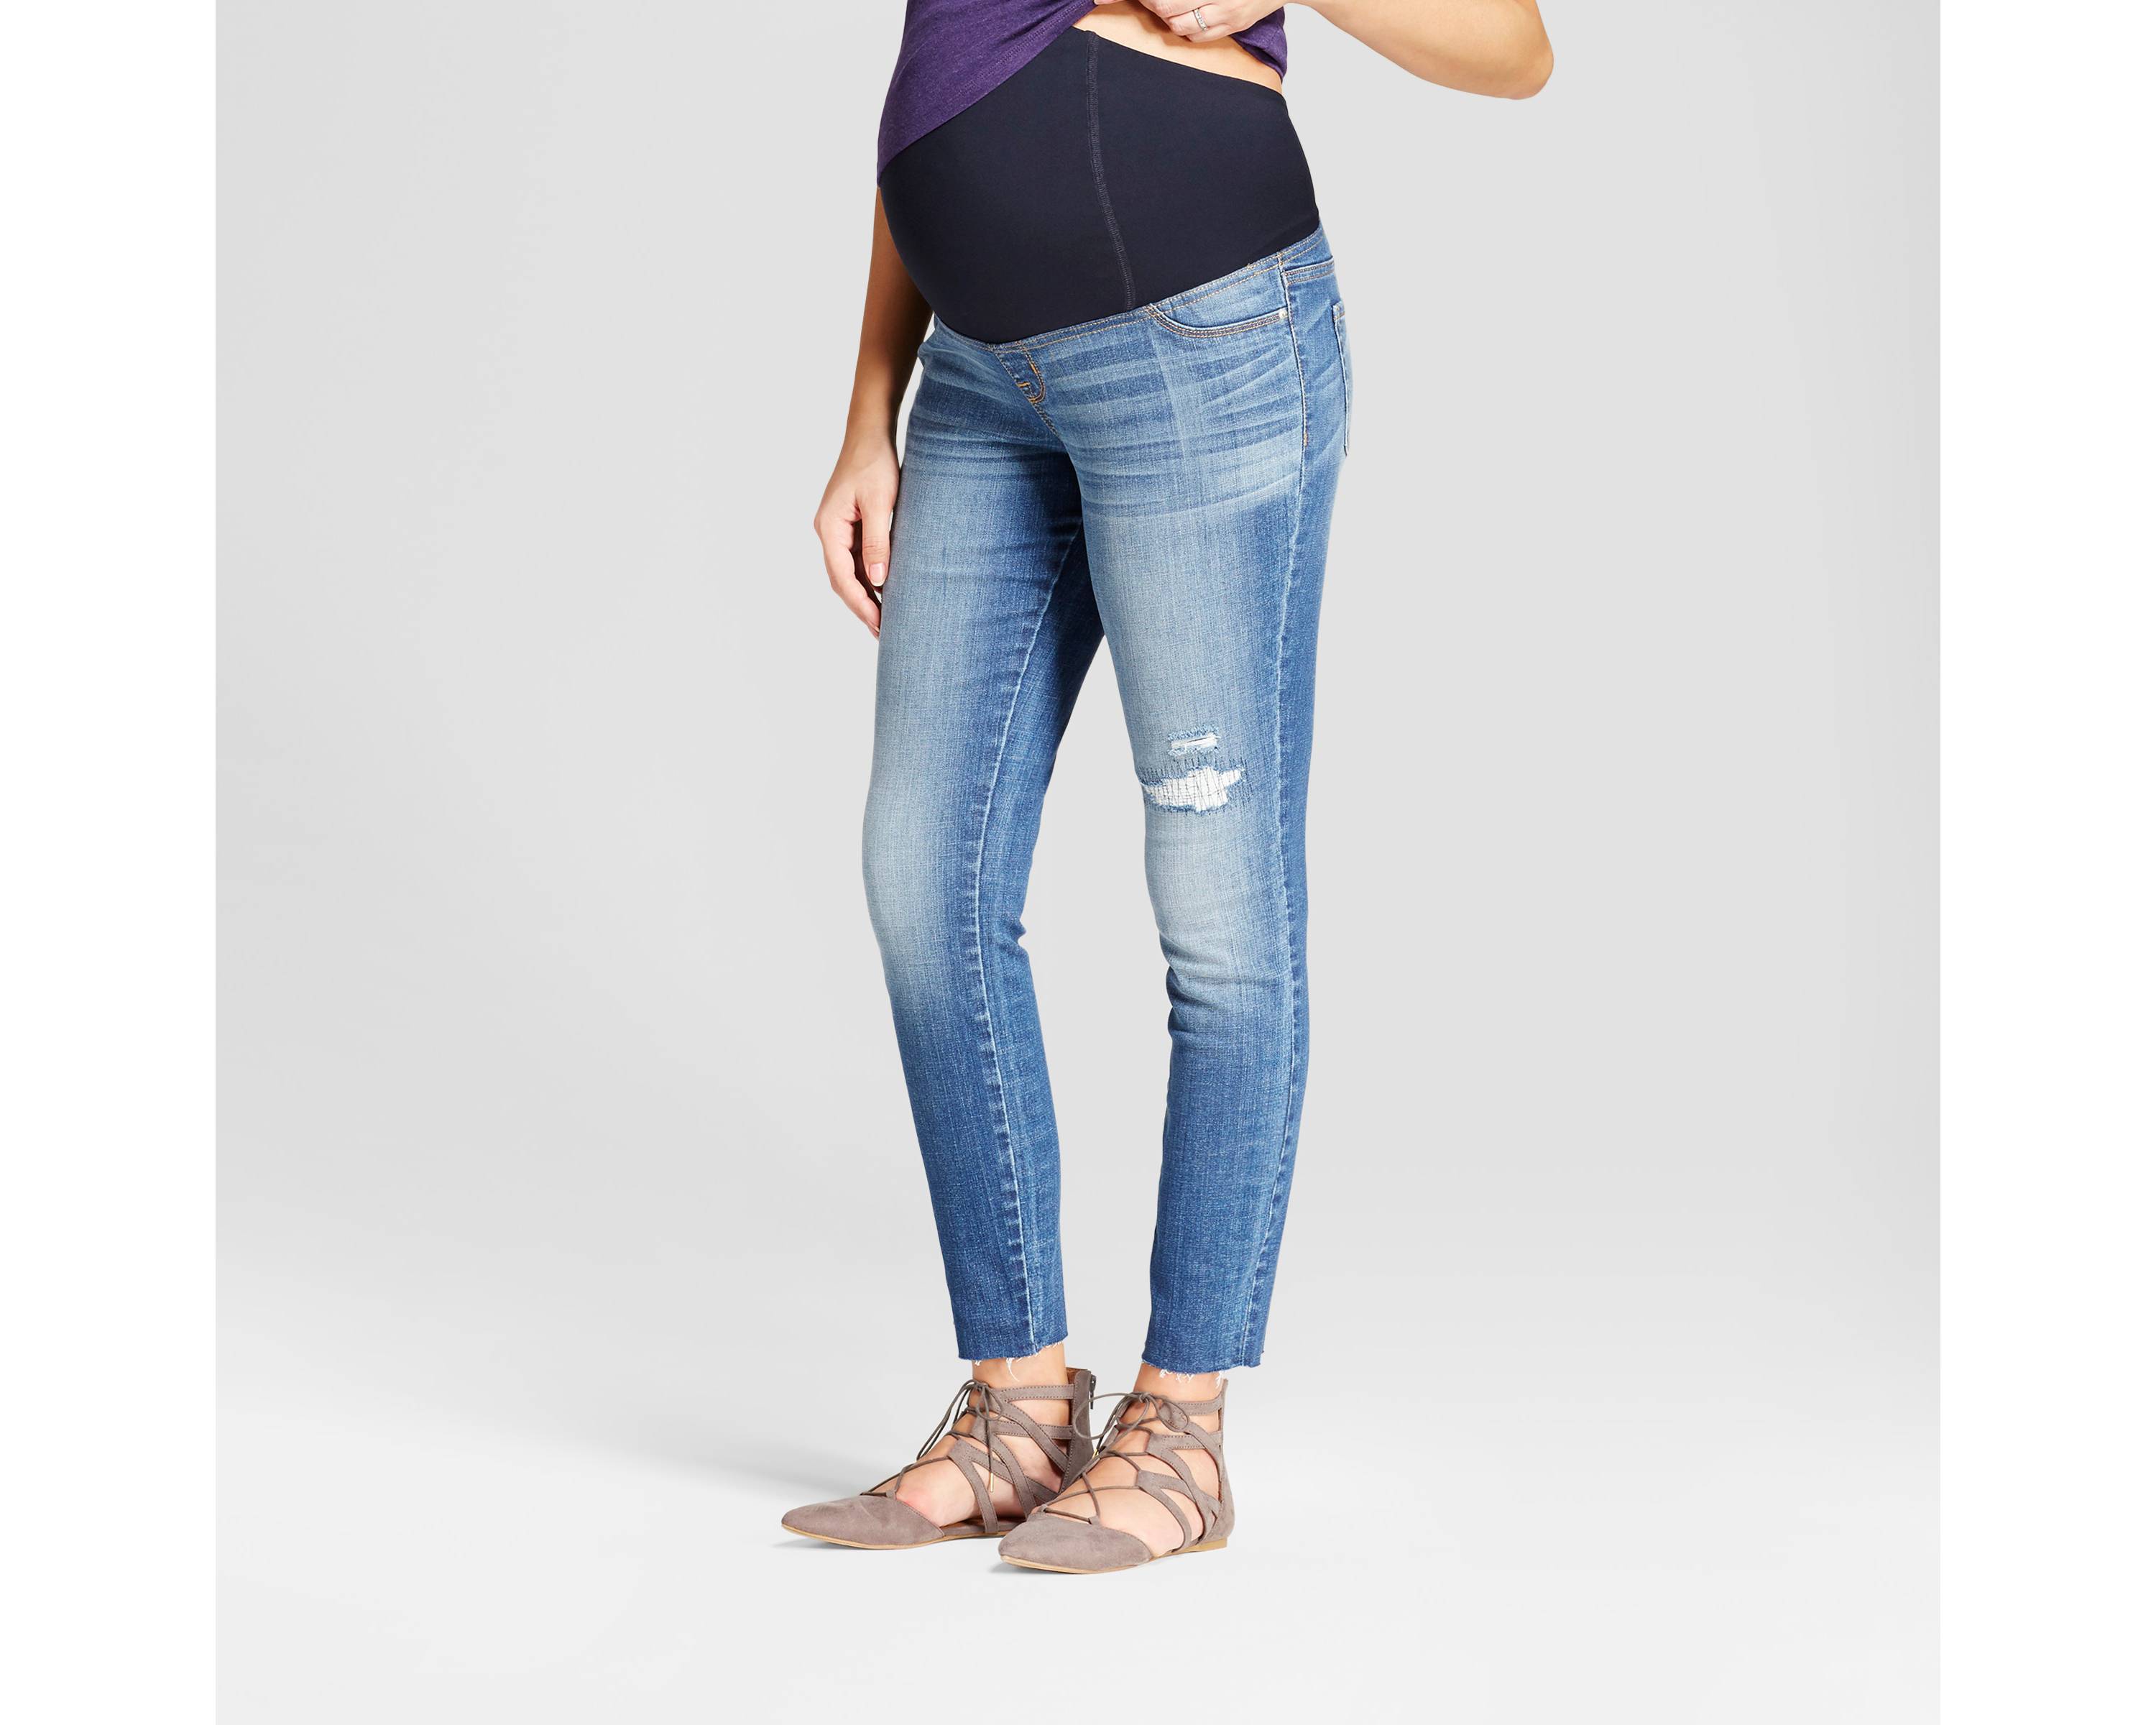 Isabel Maternity jeans review at Target